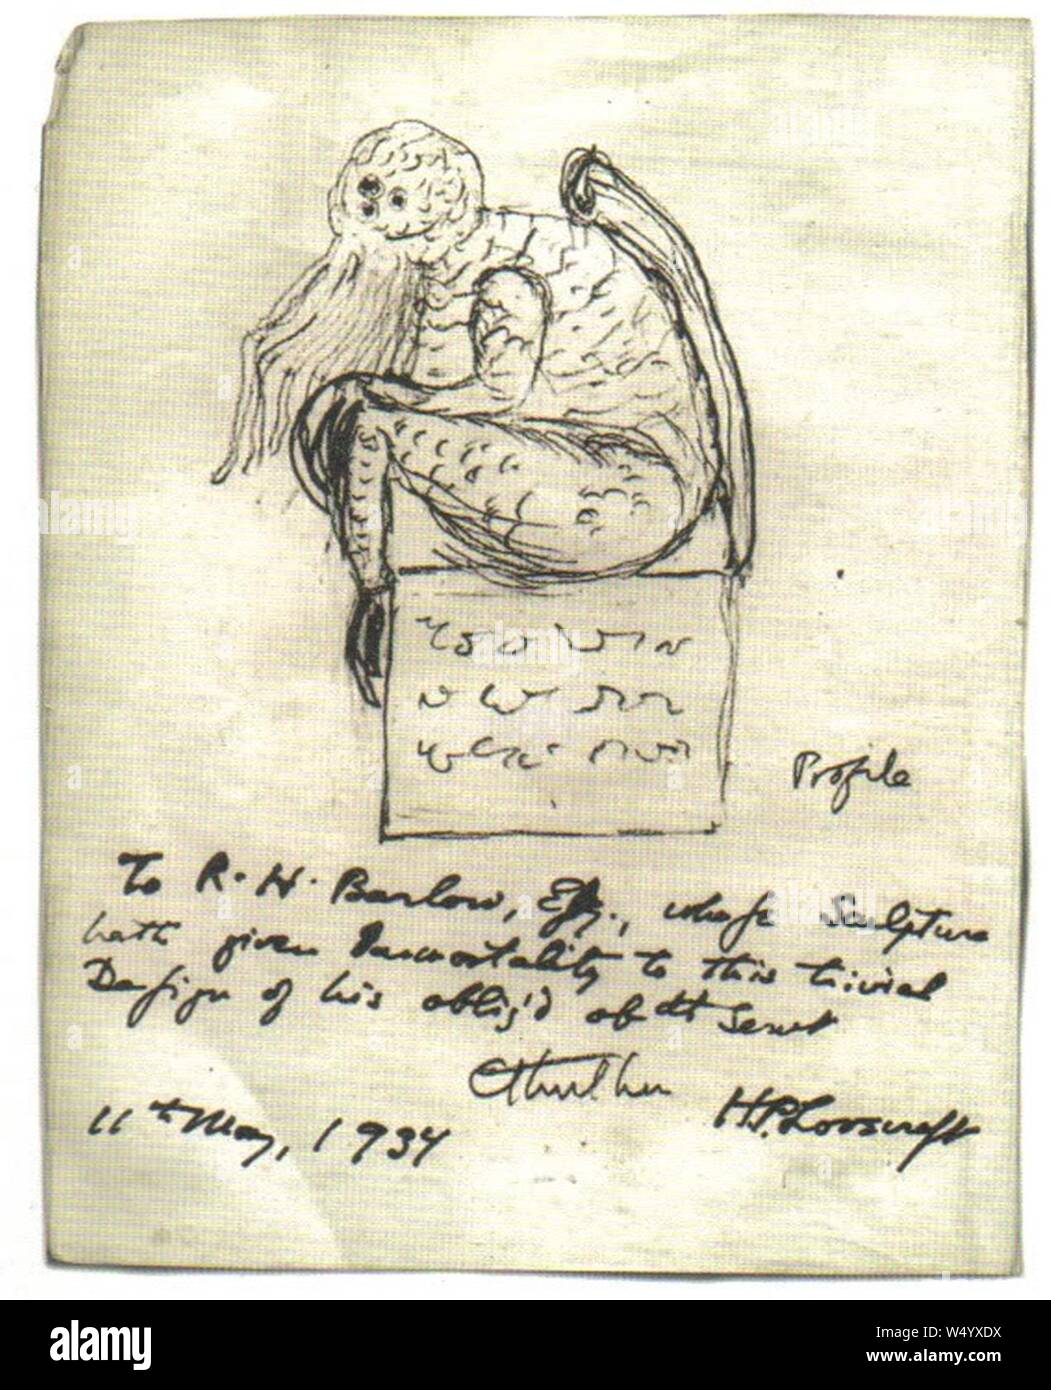 Cthulhu sketch by Lovecraft. Stock Photo